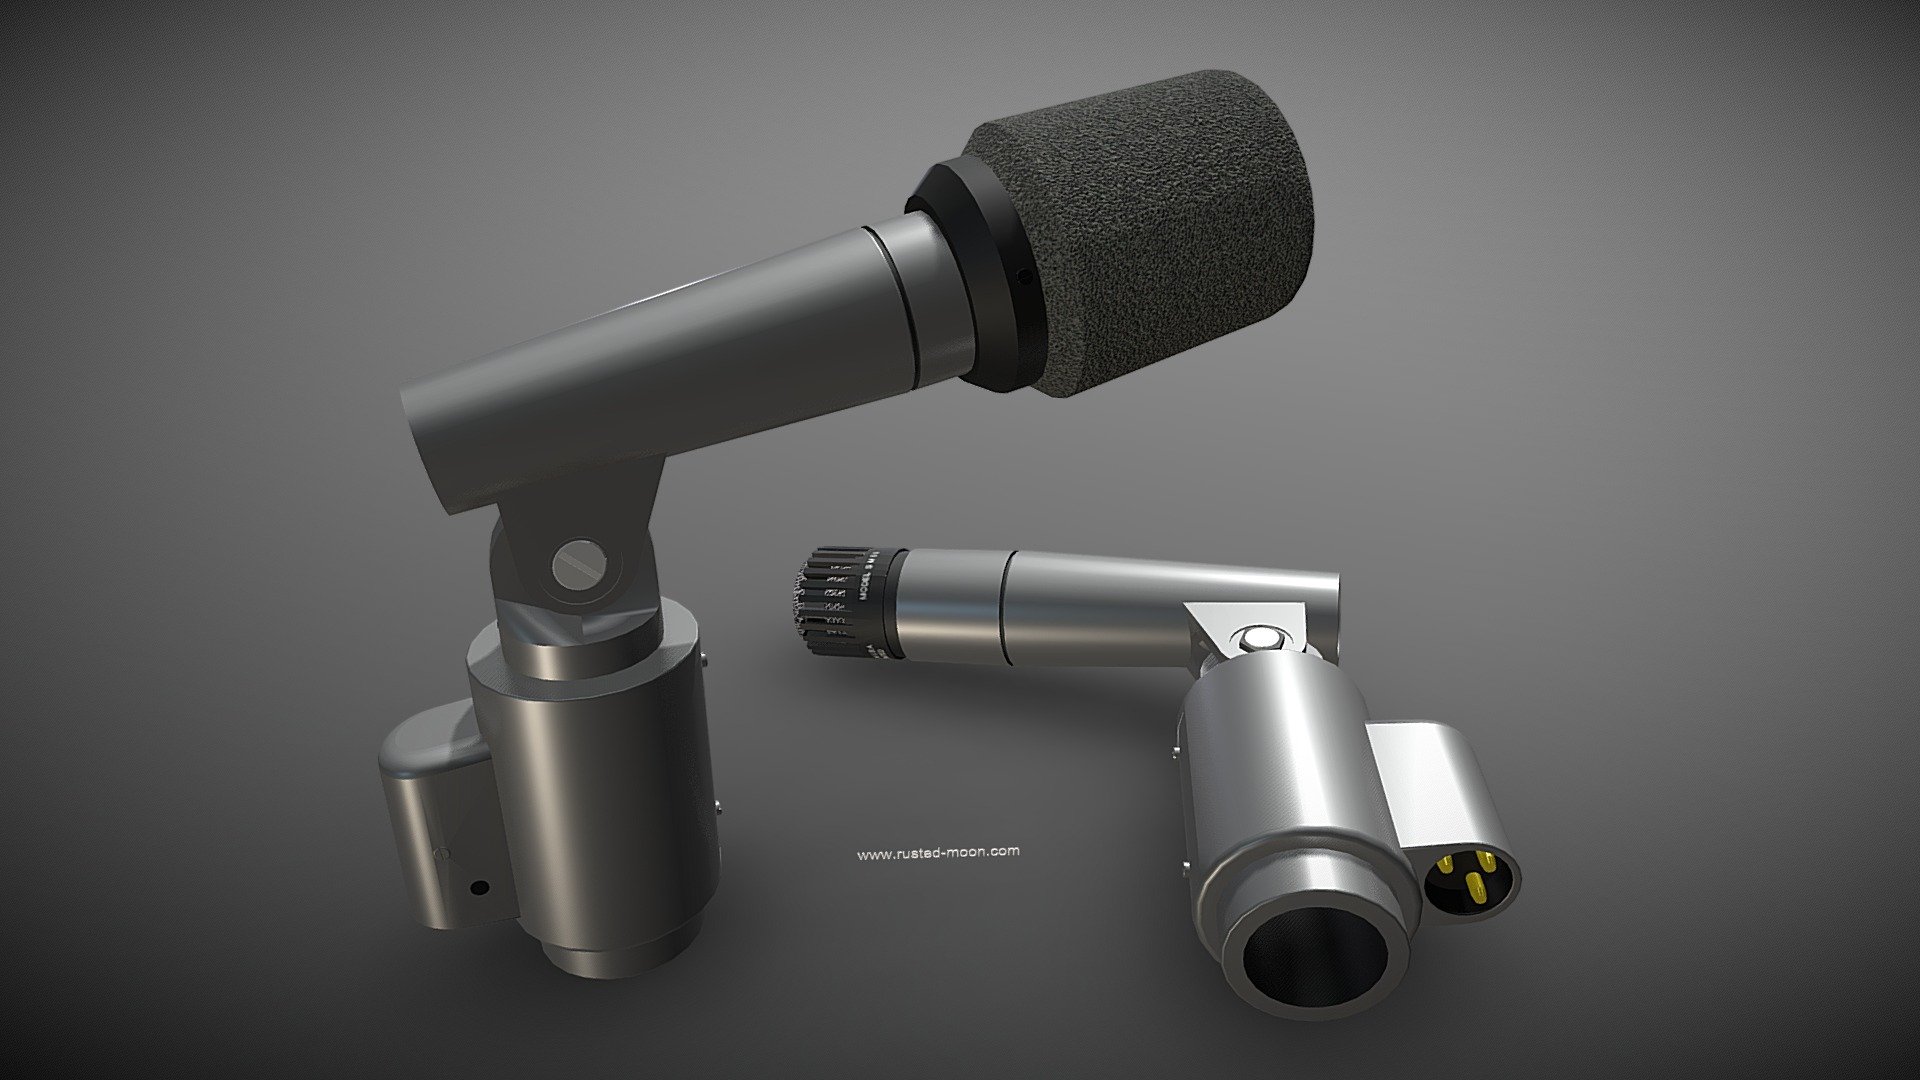 Shure SM-56 condenser vocal microphone used with and without windshield by Neil Young on stage in the 1970s. 

More: http://www.rusted-moon.com

 - Shure SM-56 Vocalist Microphone - 3D model by Rusted Moon (@rusted-moon.com) 3d model